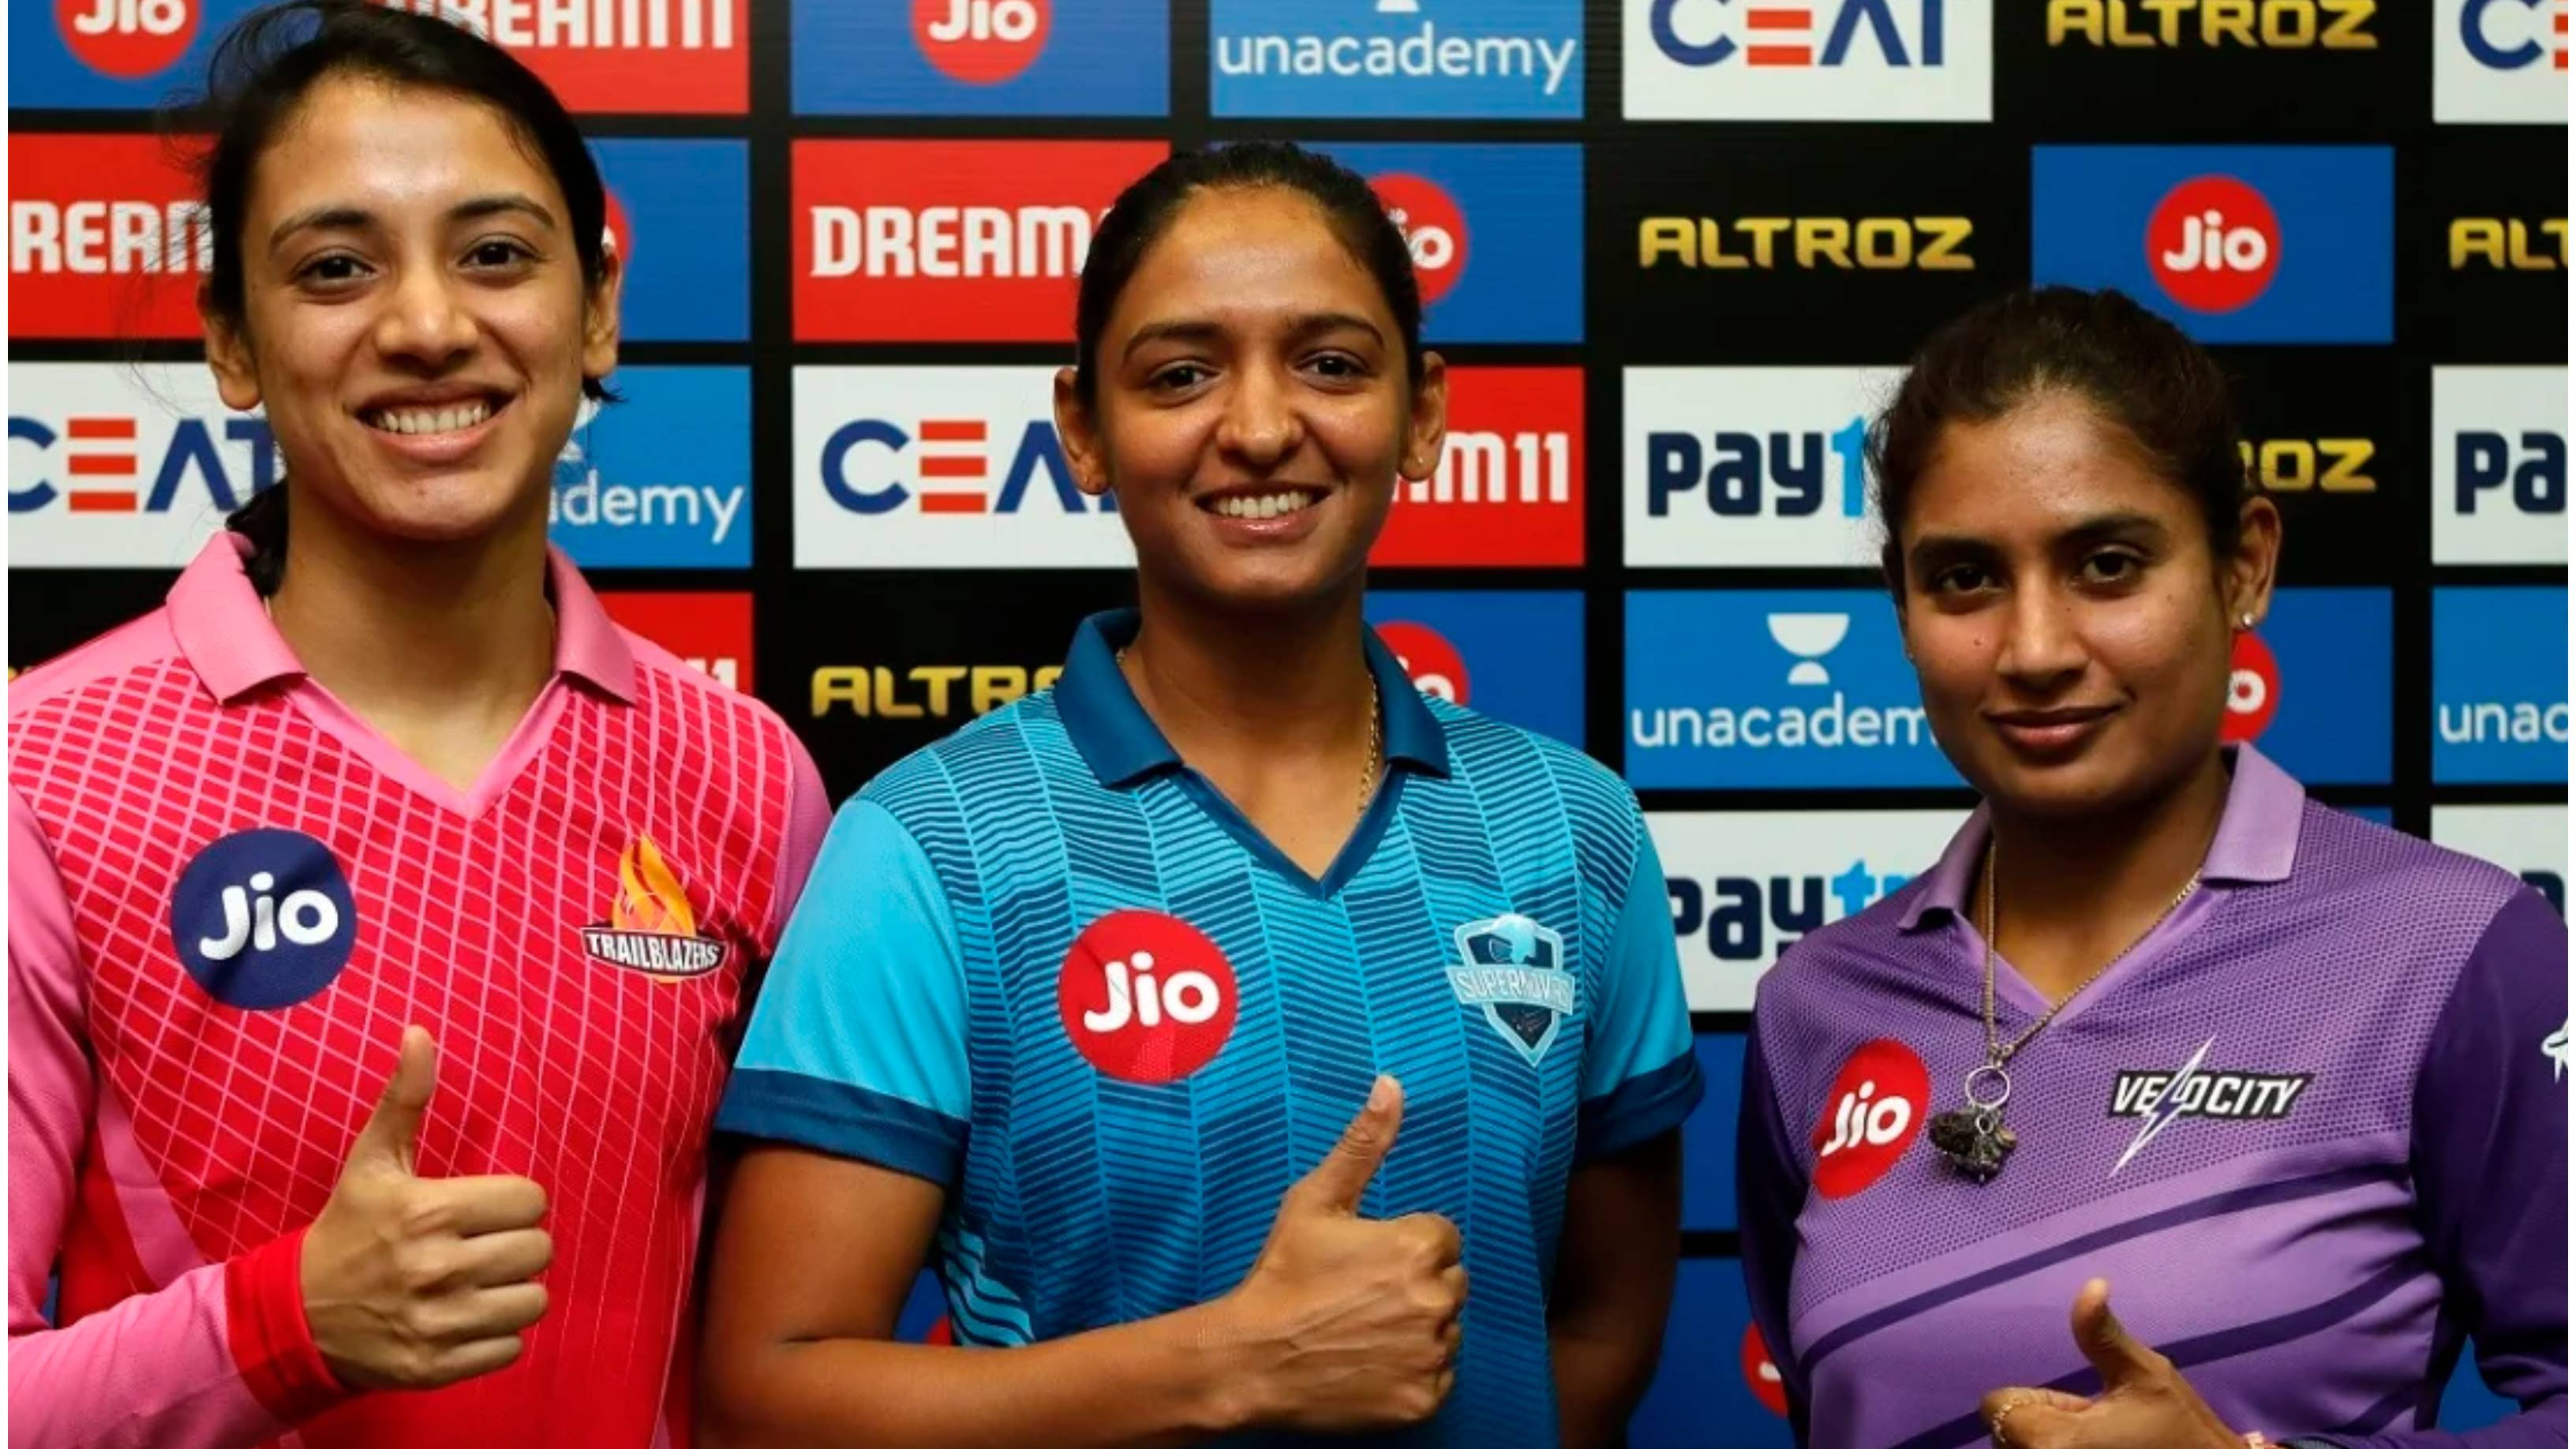 Inaugural Women's IPL season likely to take place from March 3 to 26: Report